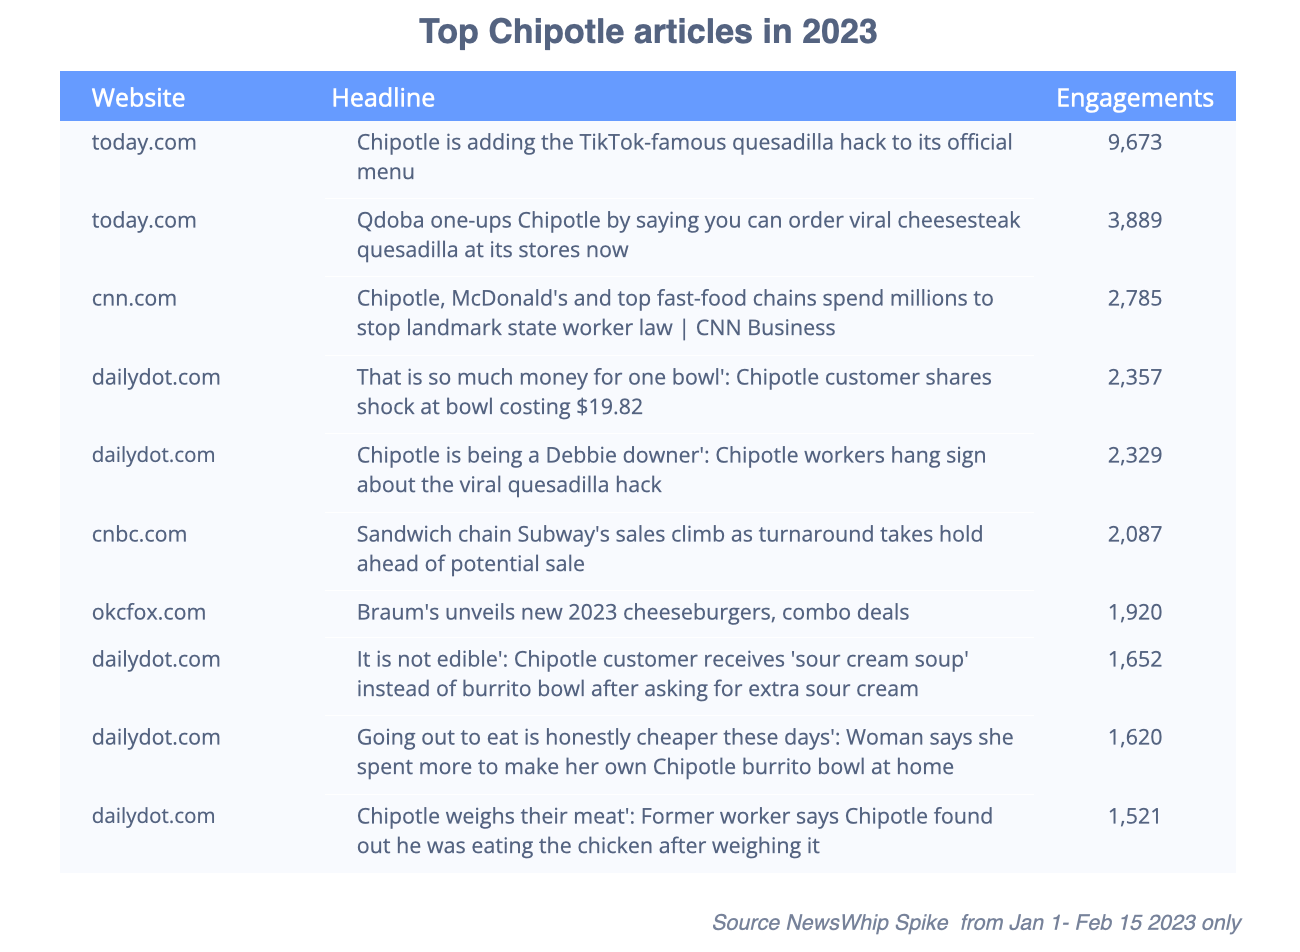 Chart showing the top ten articles about Chipotle in 2023, ranked by engagement